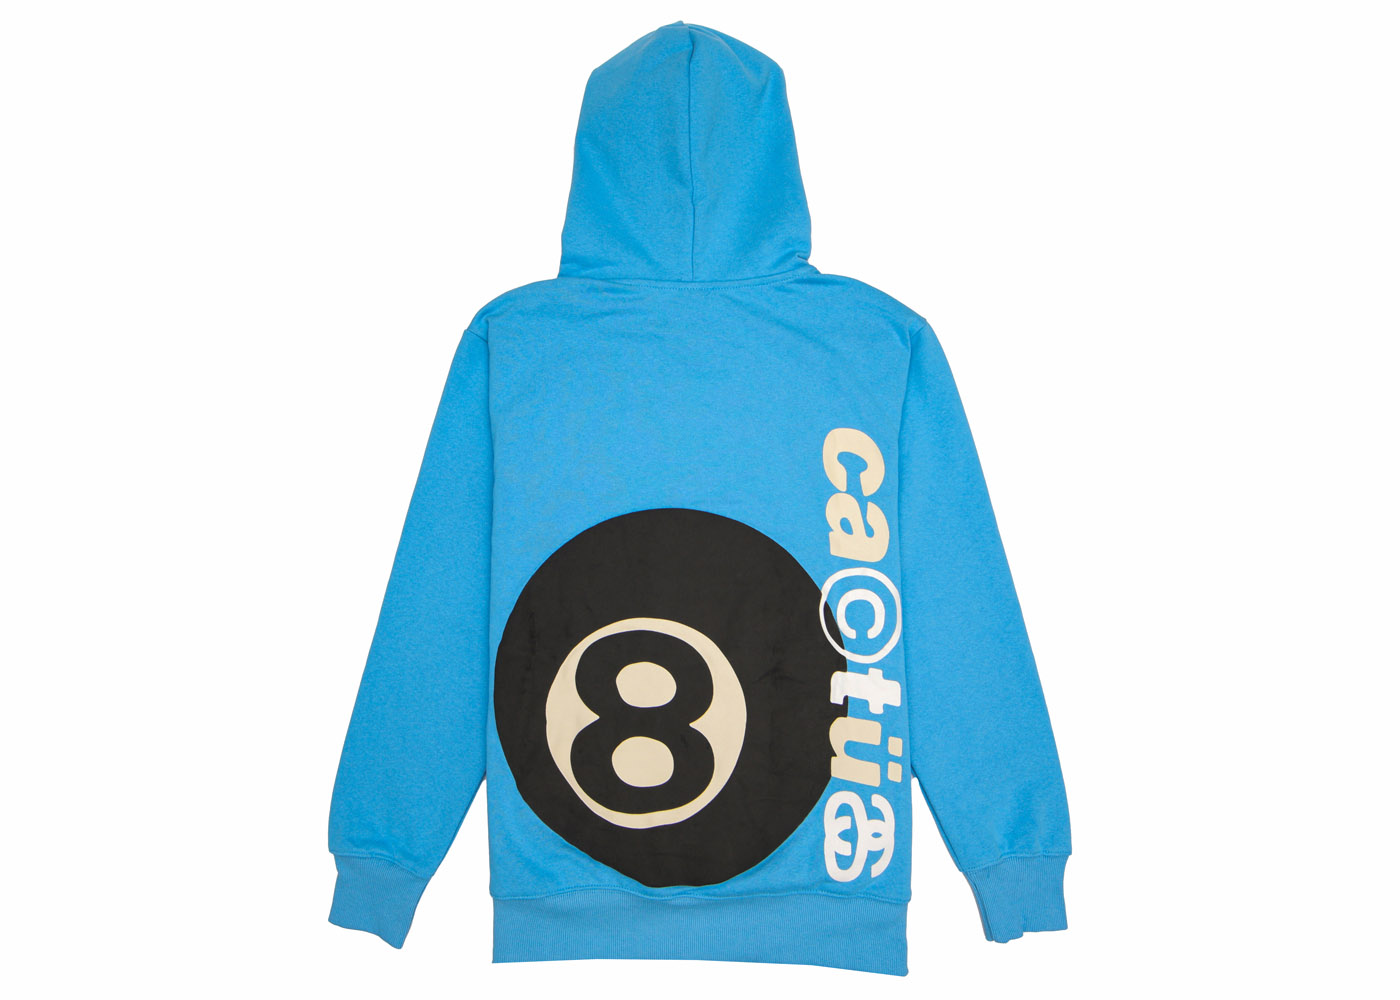 Stussy CPFM 8 BALL PIGMENT DYED HOODIE L